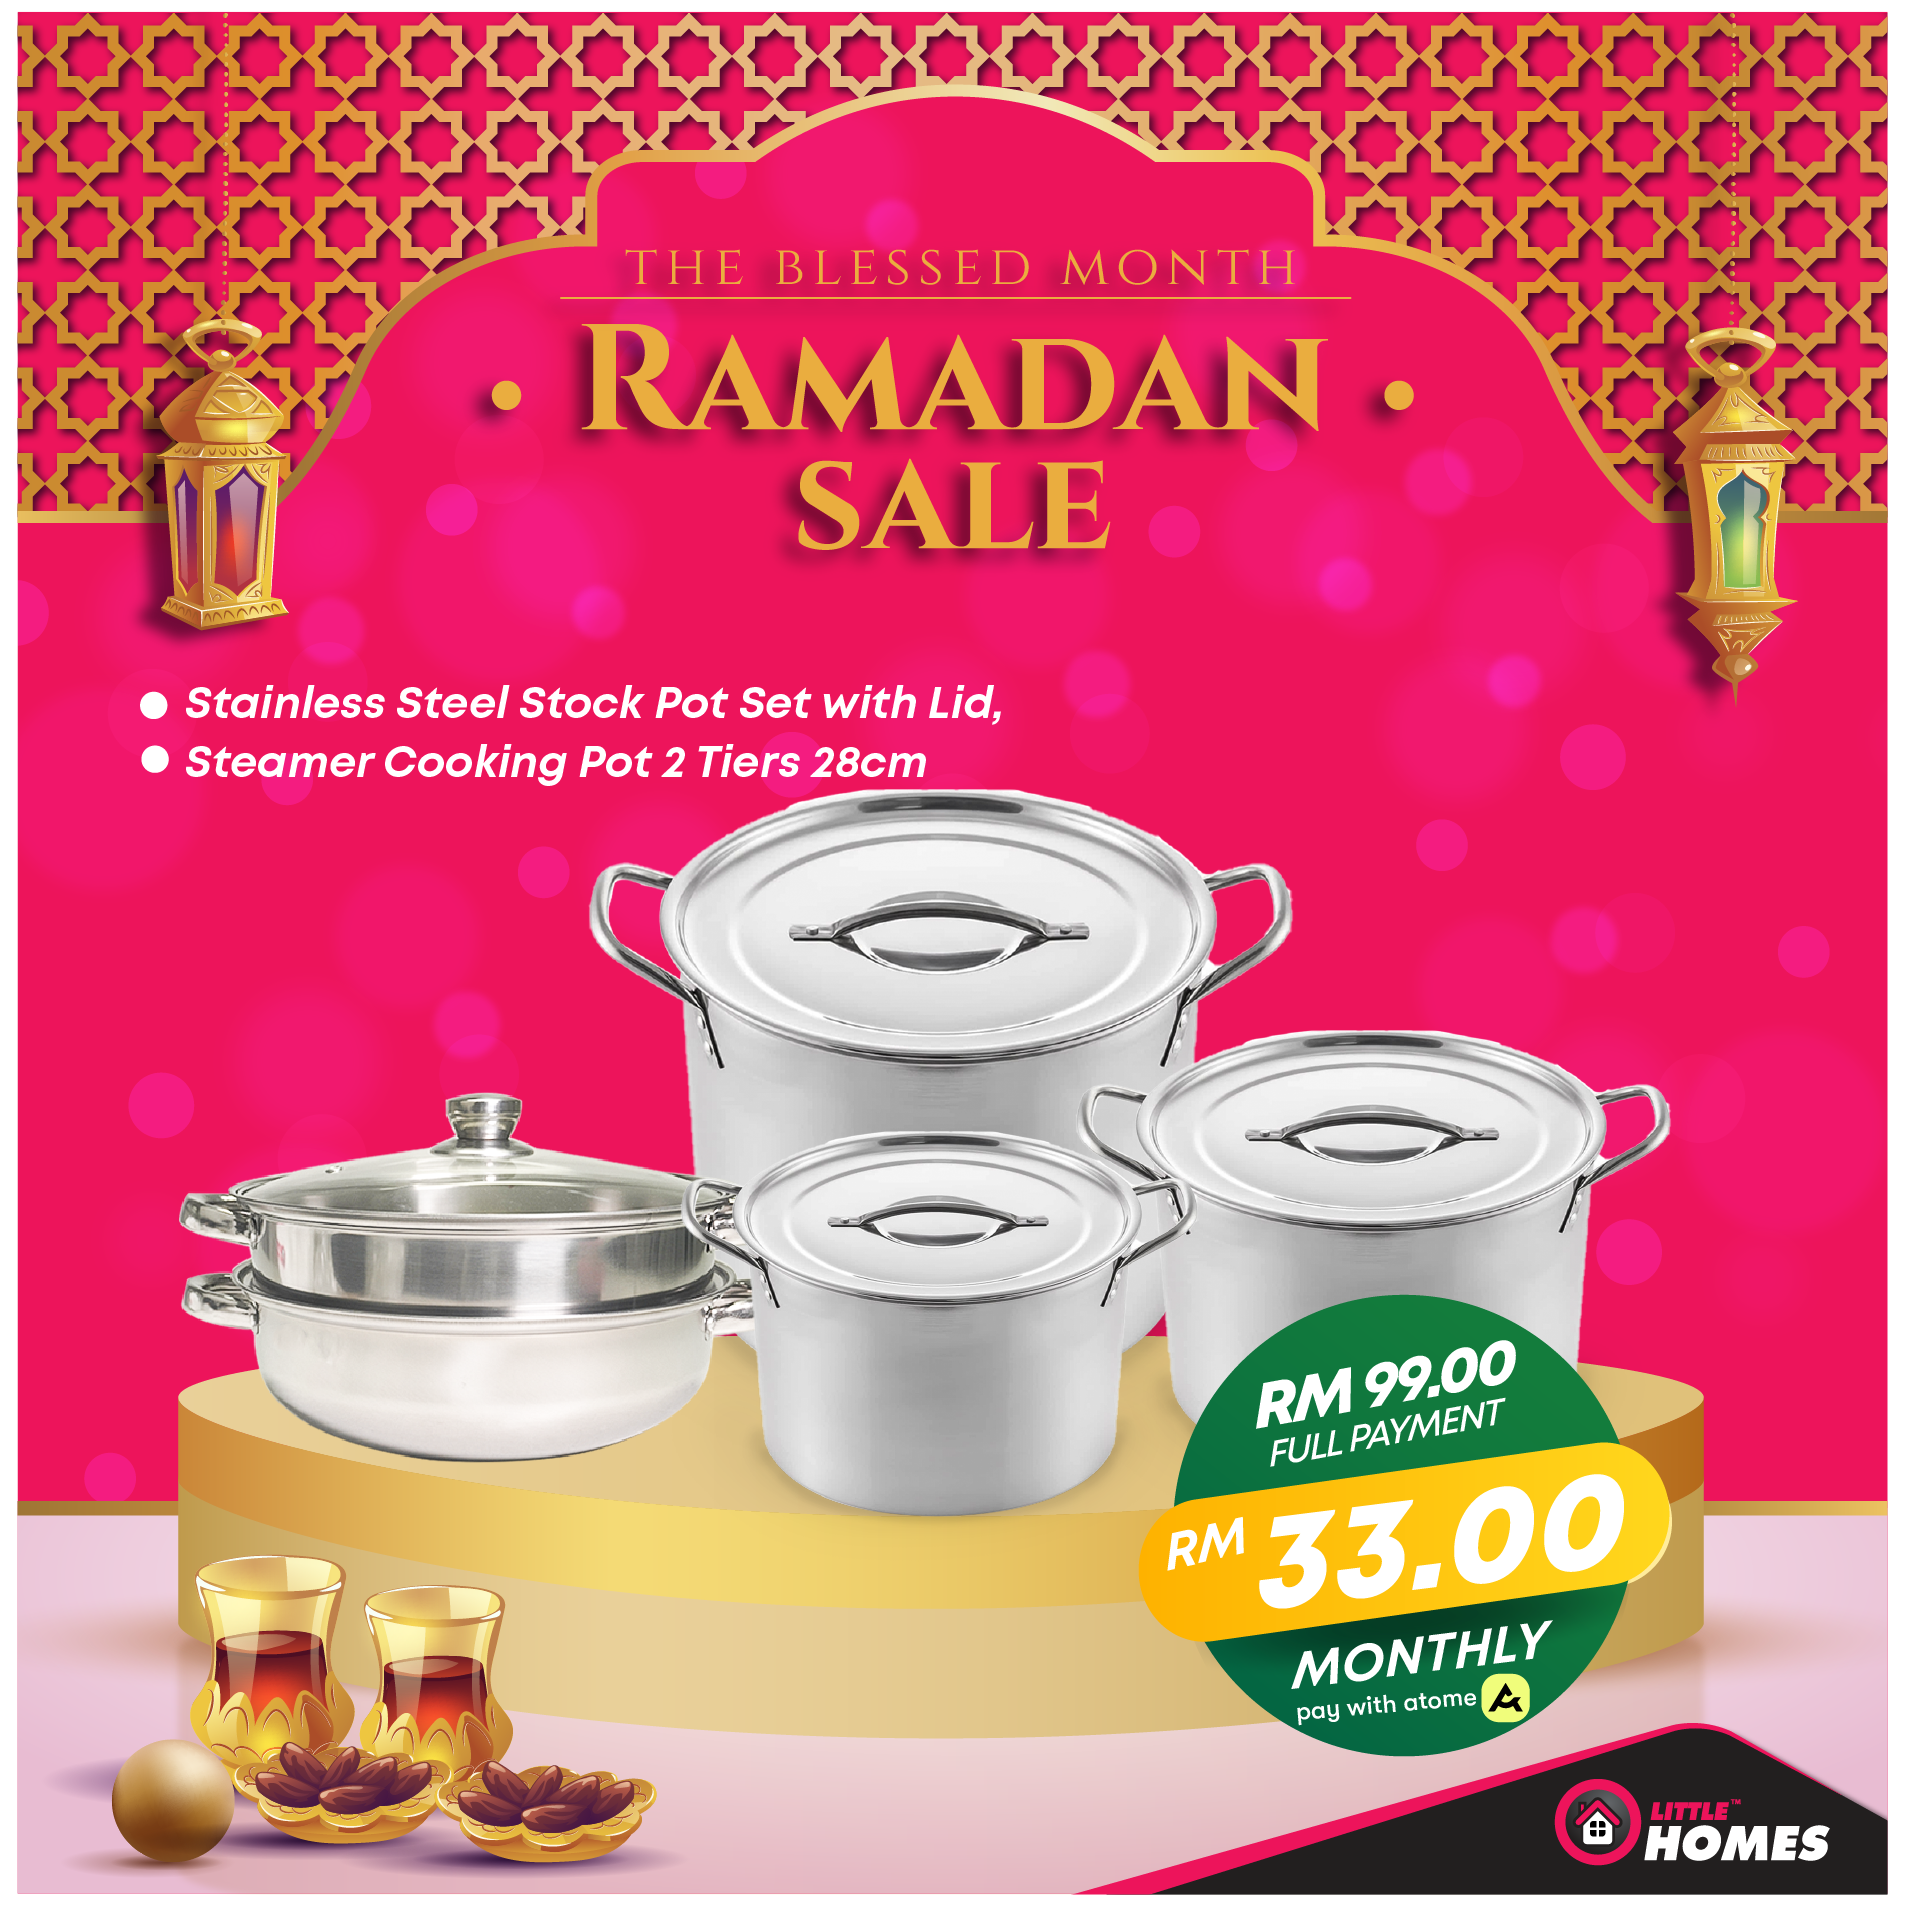 Little Homes 3pcs Stock Pot Set & 28cm Steamer Cooking Pot #HomeyRaya23 Ramadan Bundle Sale RM99.00 *Available for RM33.00 of 3payments with Atome*